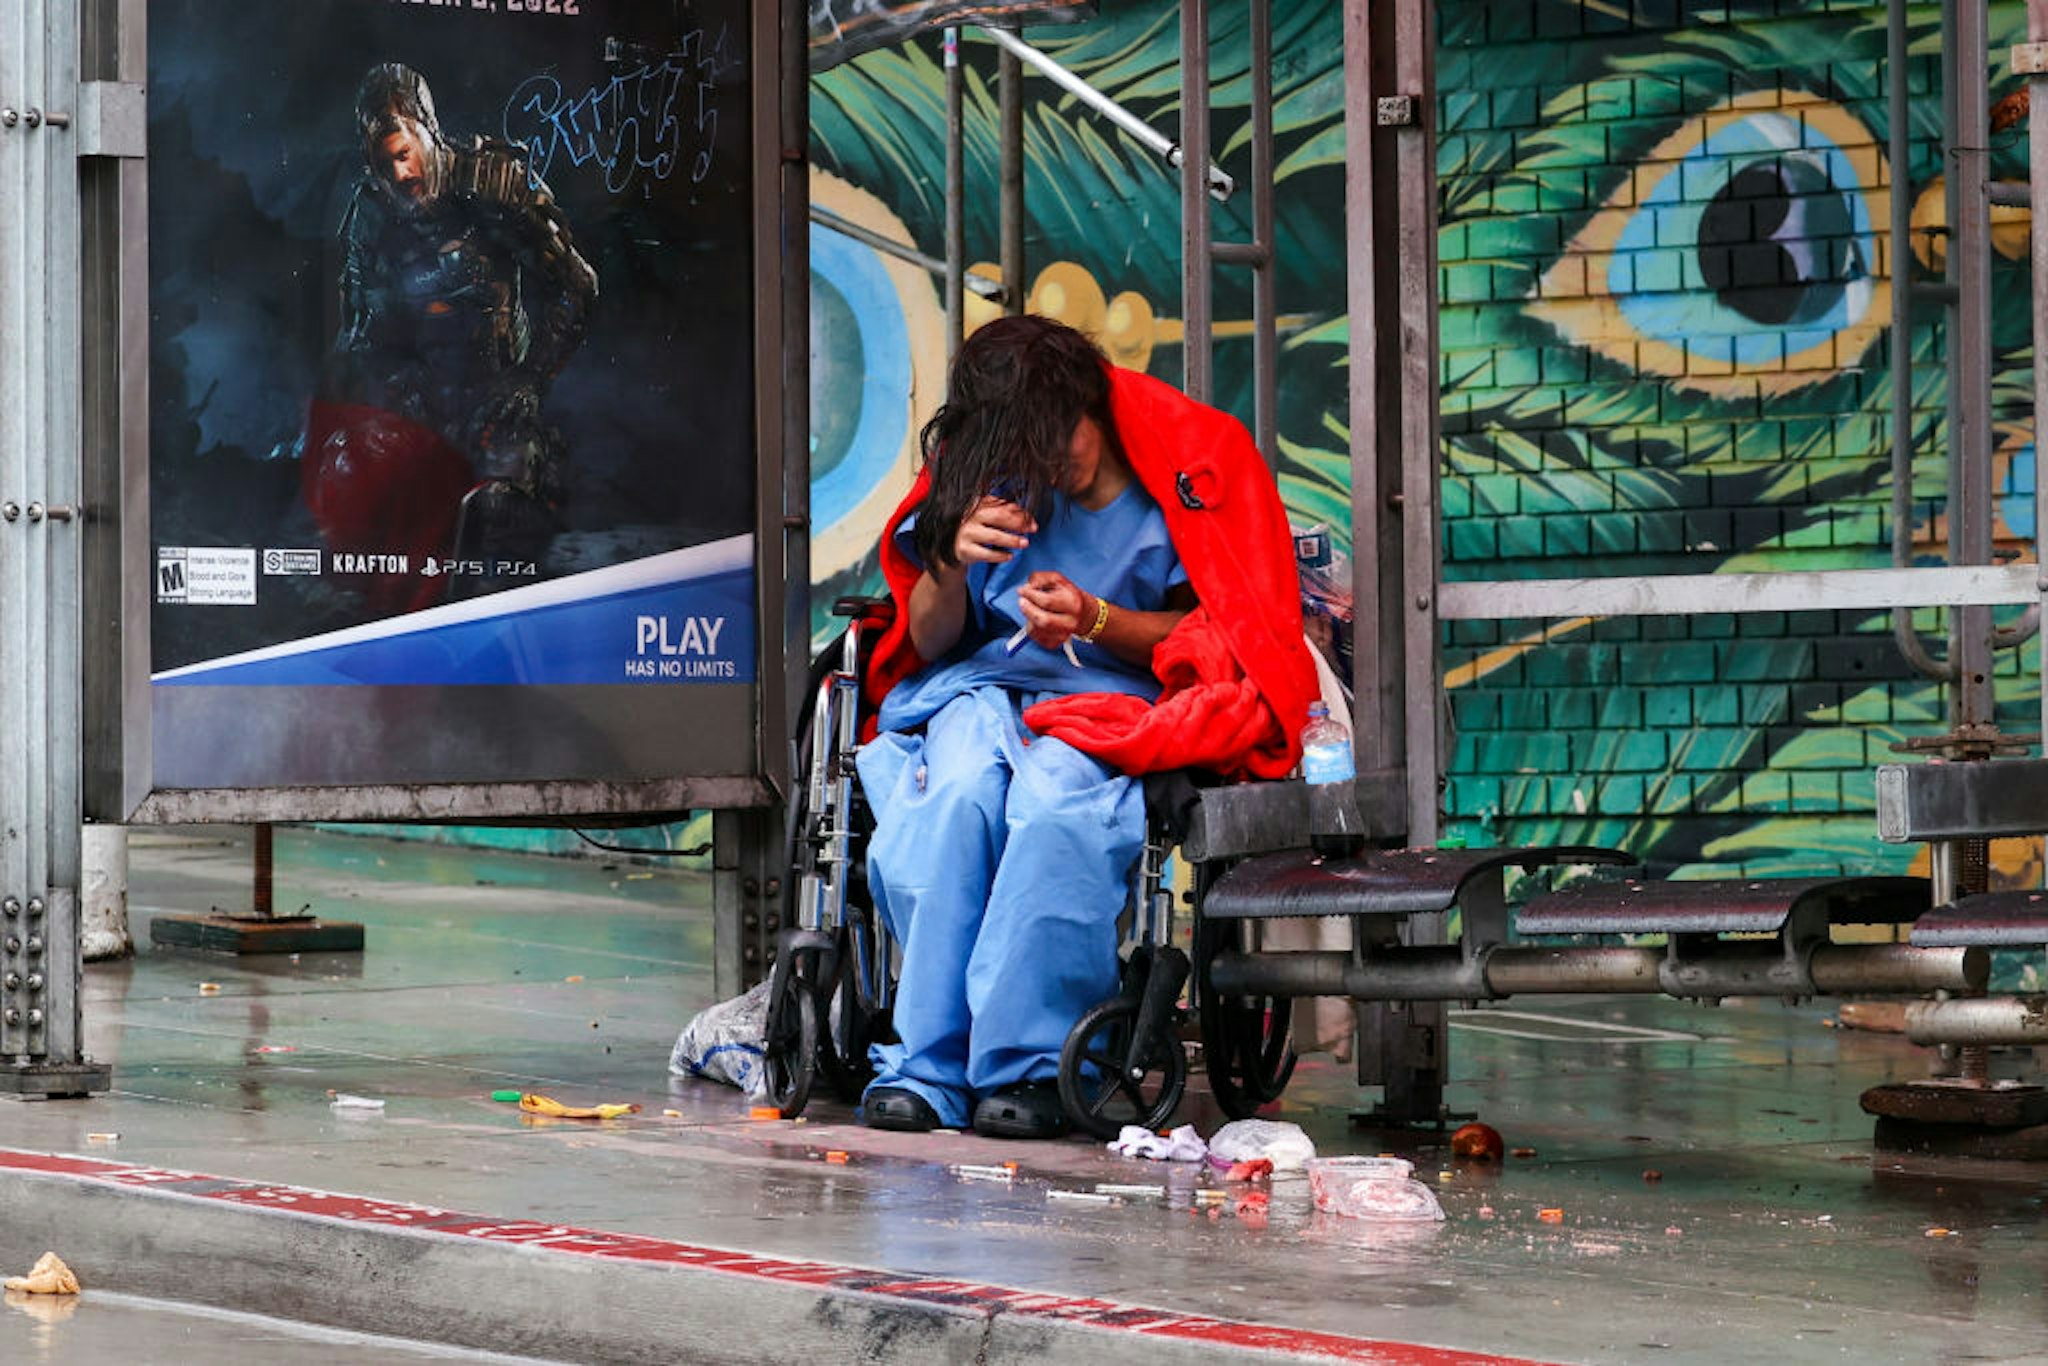 SAN FRANCISCO, CA - JANUARY 13: A homeless woman with wheelchair is seen on a bus stop near the City Hall during rainy day in San Francisco on January 13, 2023 as atmospheric river storms hit California, United States. (Photo by Tayfun Coskun/Anadolu Agency via Getty Images)